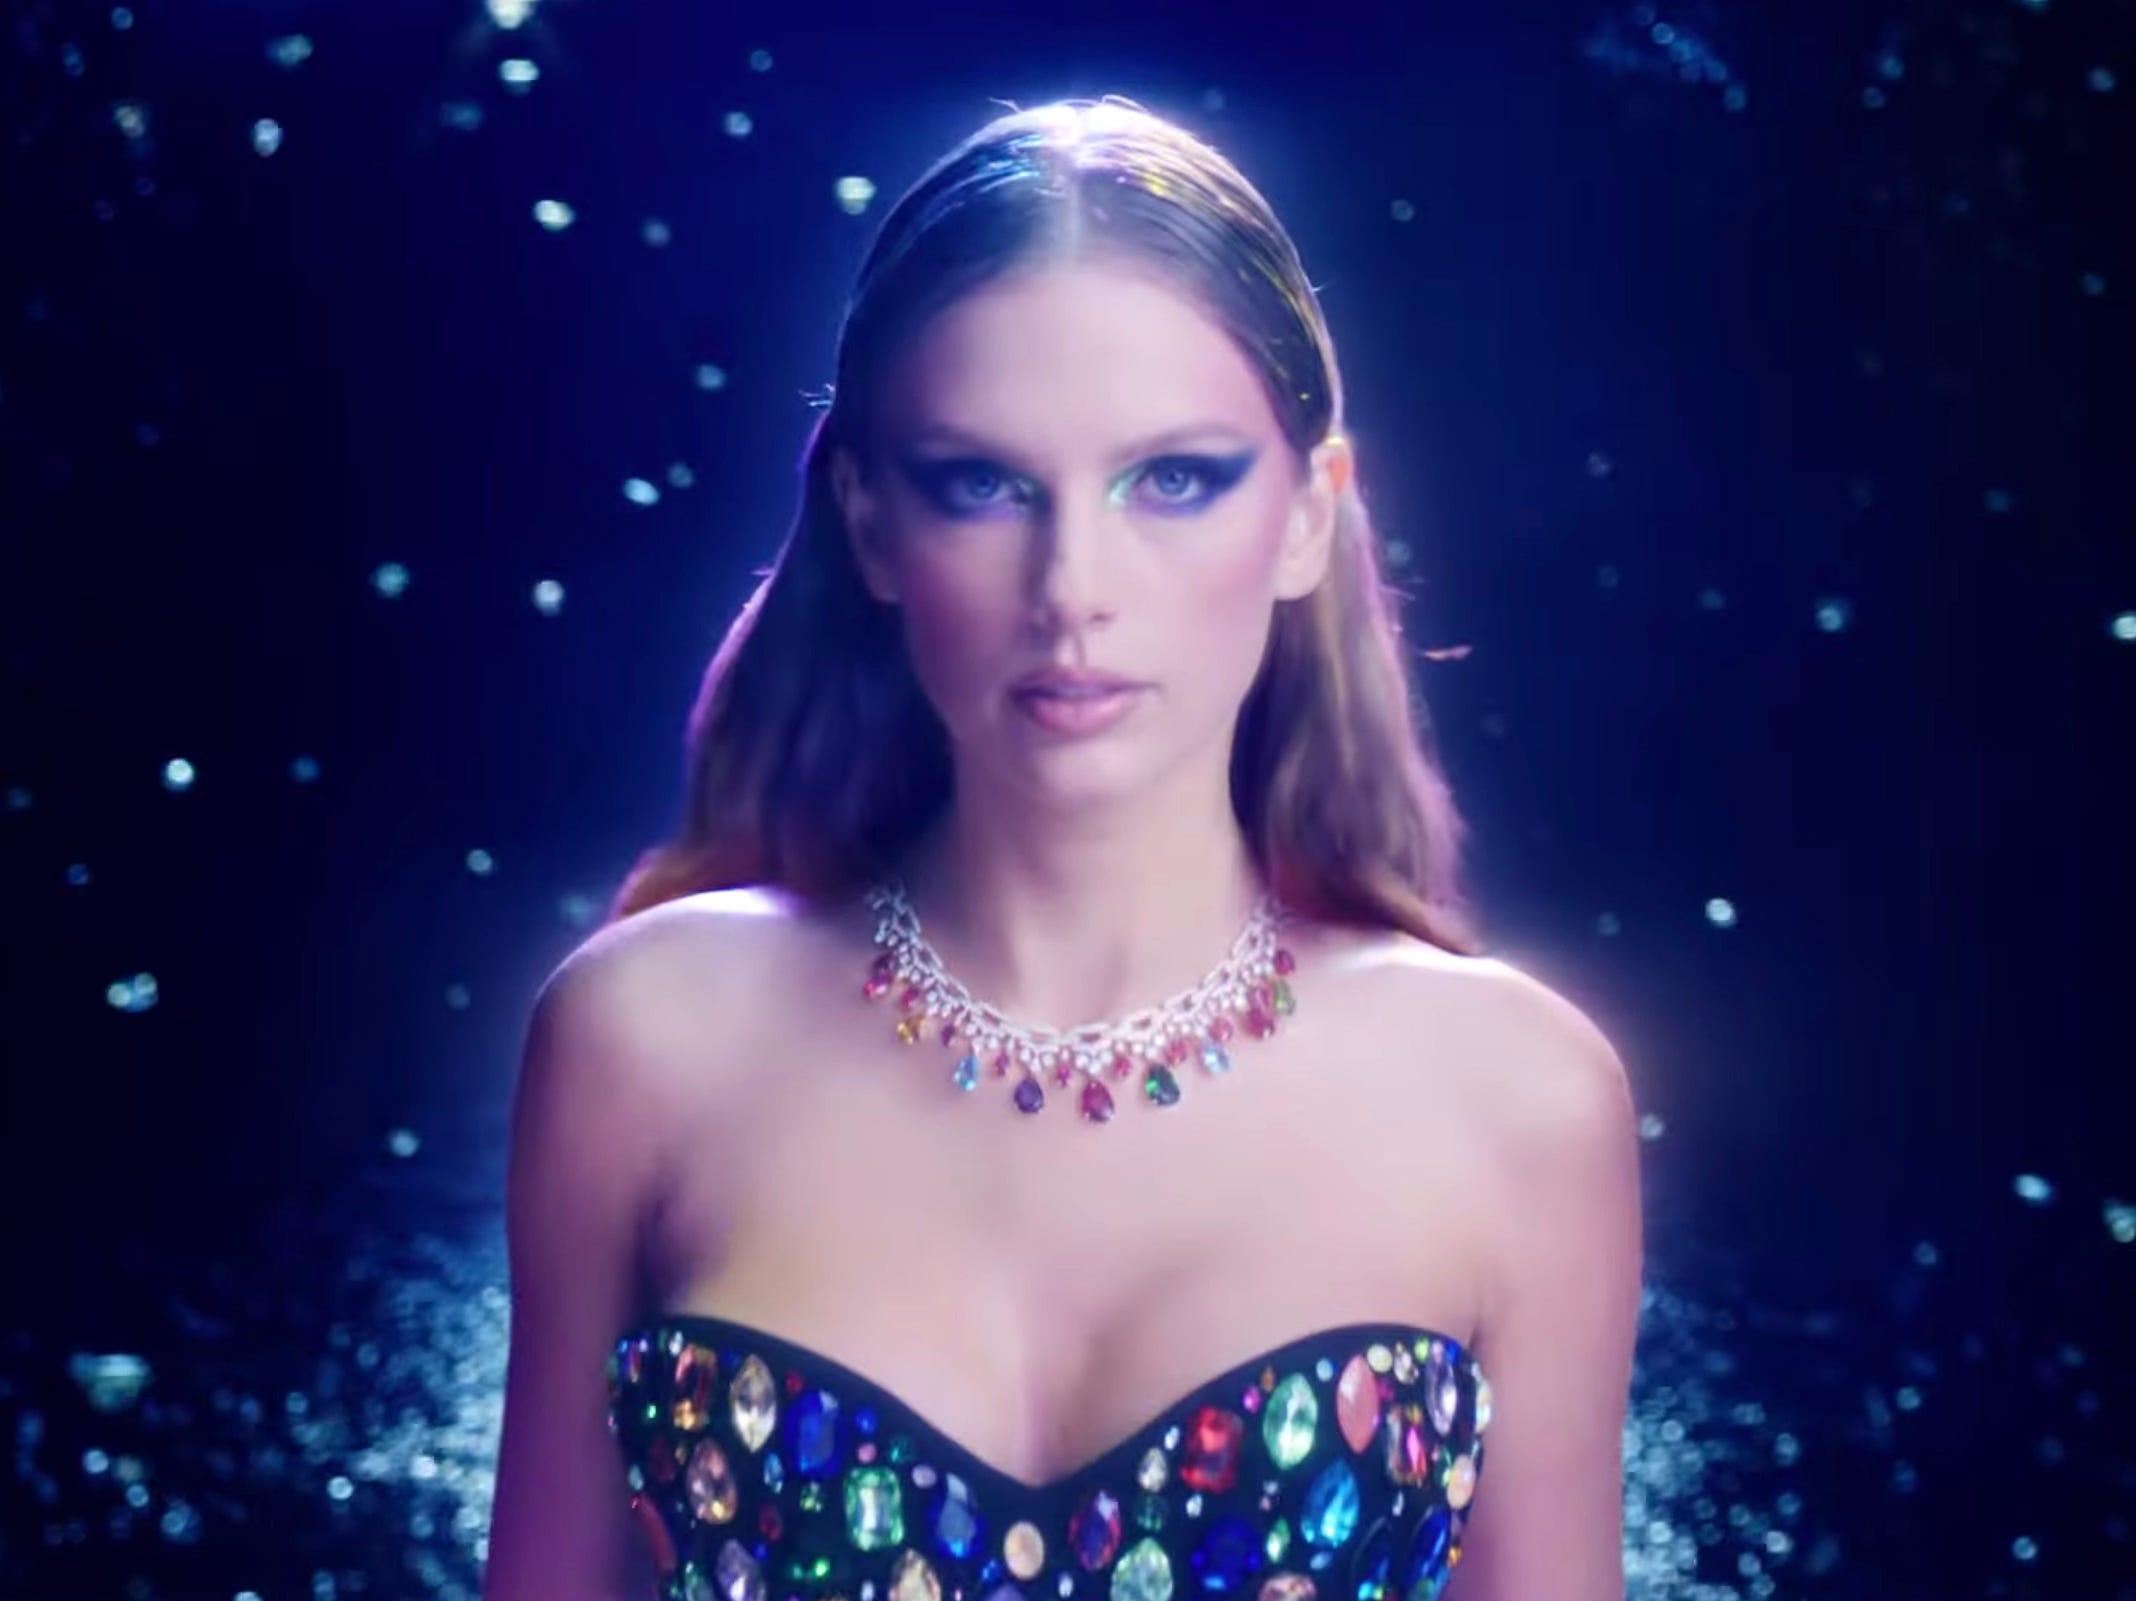 <p>The <a href="https://www.businessinsider.com/taylor-swift-bejeweled-music-video-easter-eggs-2022-10">music video for "Bejeweled"</a> includes a variety of celebrity cameos, including Laura Dern, the Haim sisters, and Dita Von Teese.</p>